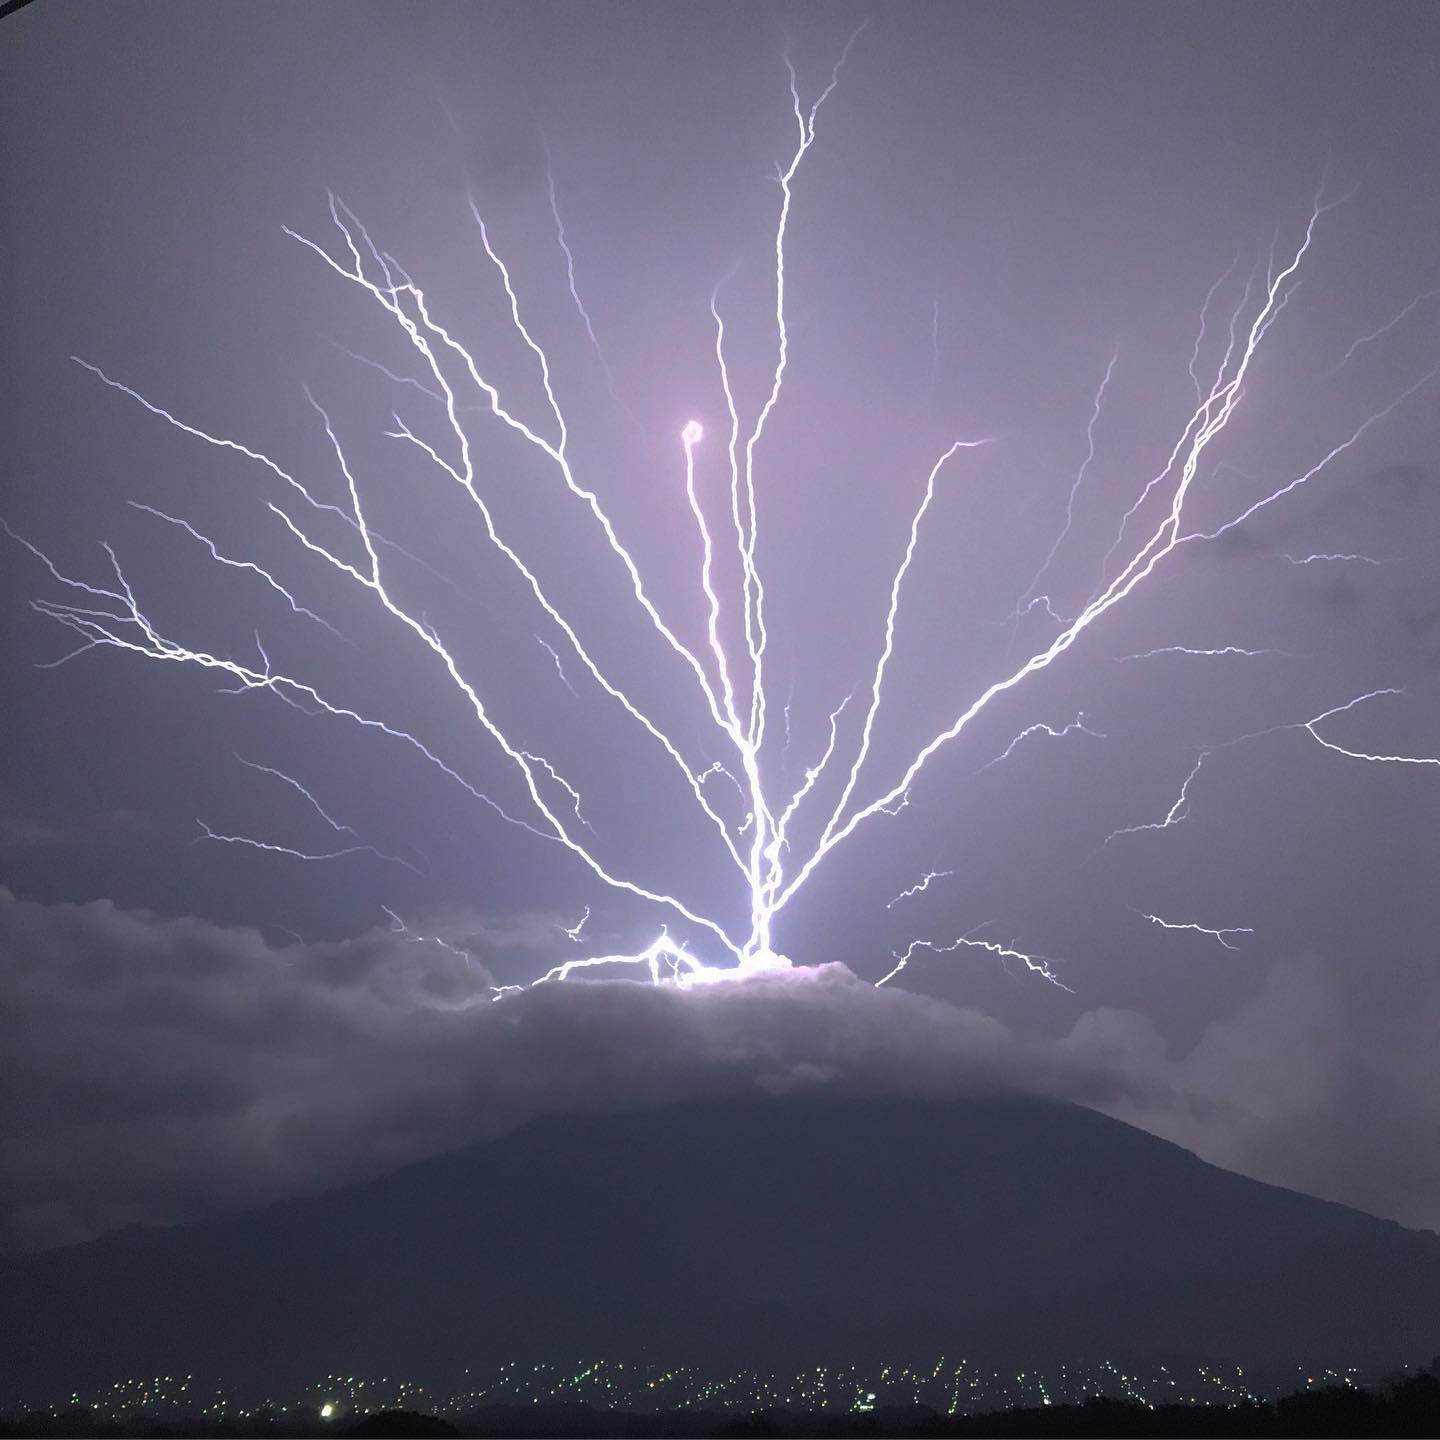 The upward lightning was spotted at Guatemala's Volcan de Agua 